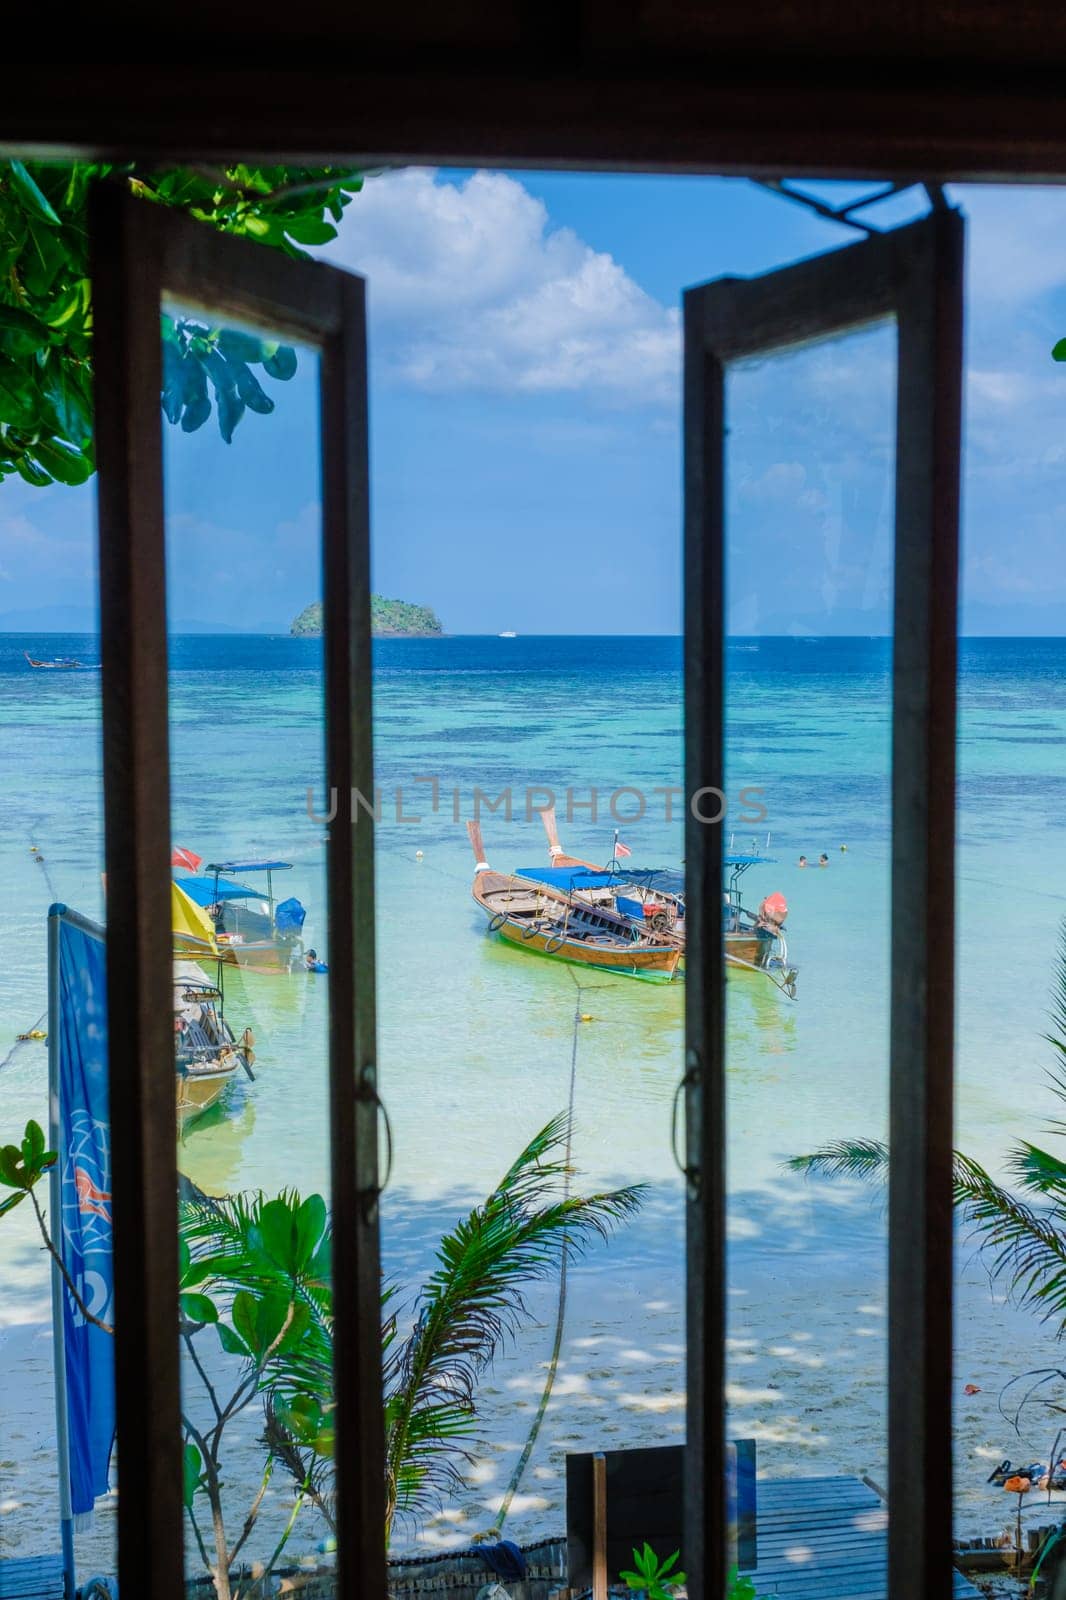 Koh Lipe Island Southern Thailand view from the window with turqouse colored ocean and white sandy beach at Ko Lipe.